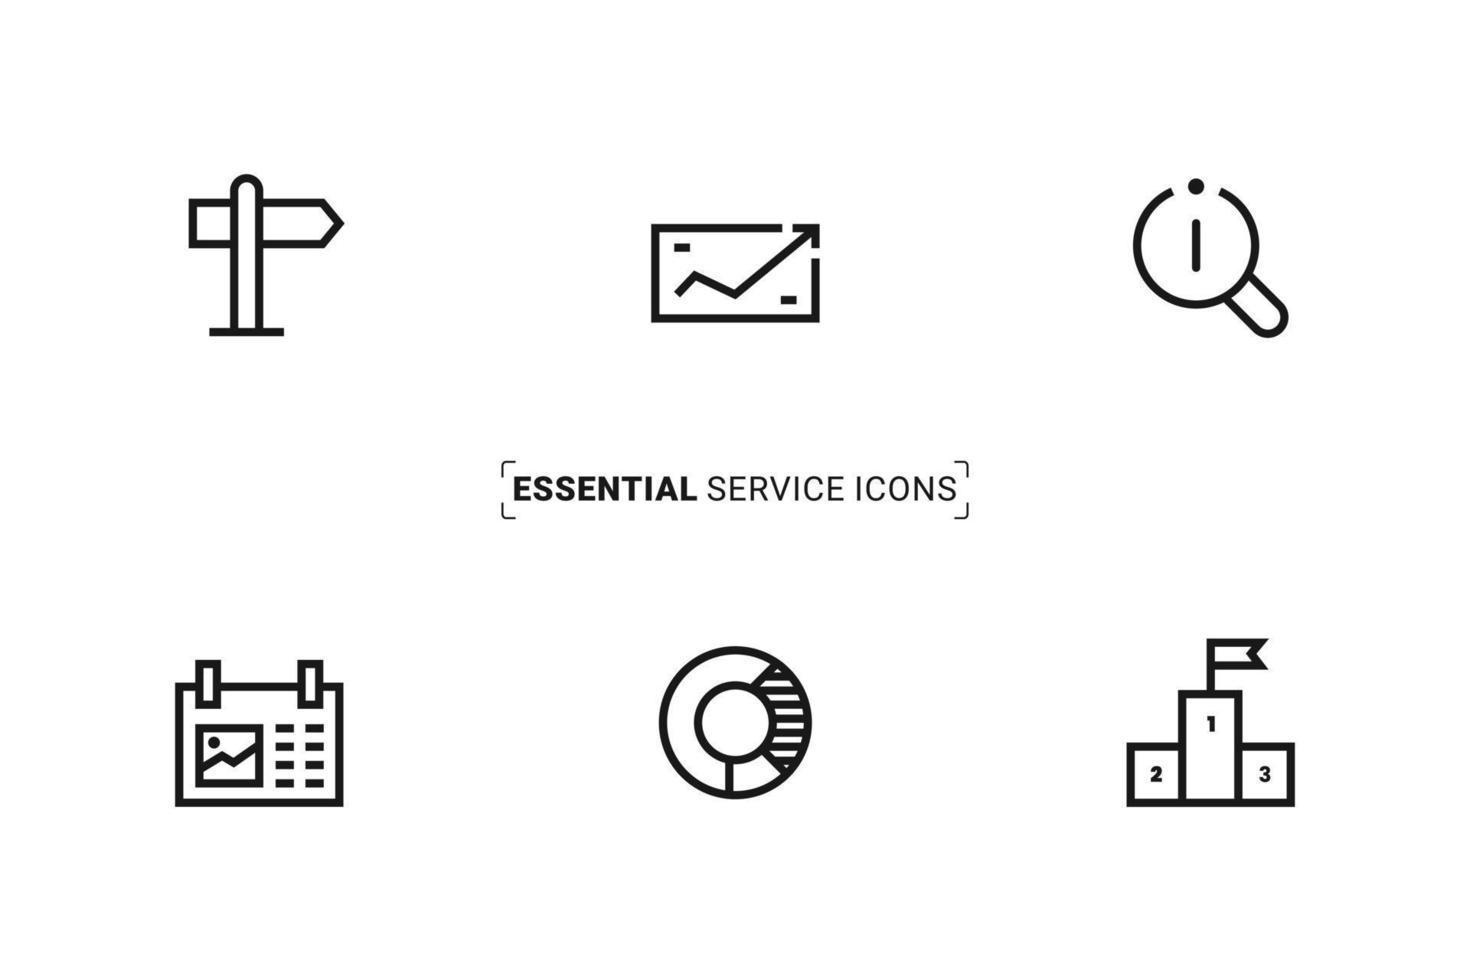 Creative business growth icons for multipurpose use. For web and print purposes. vector